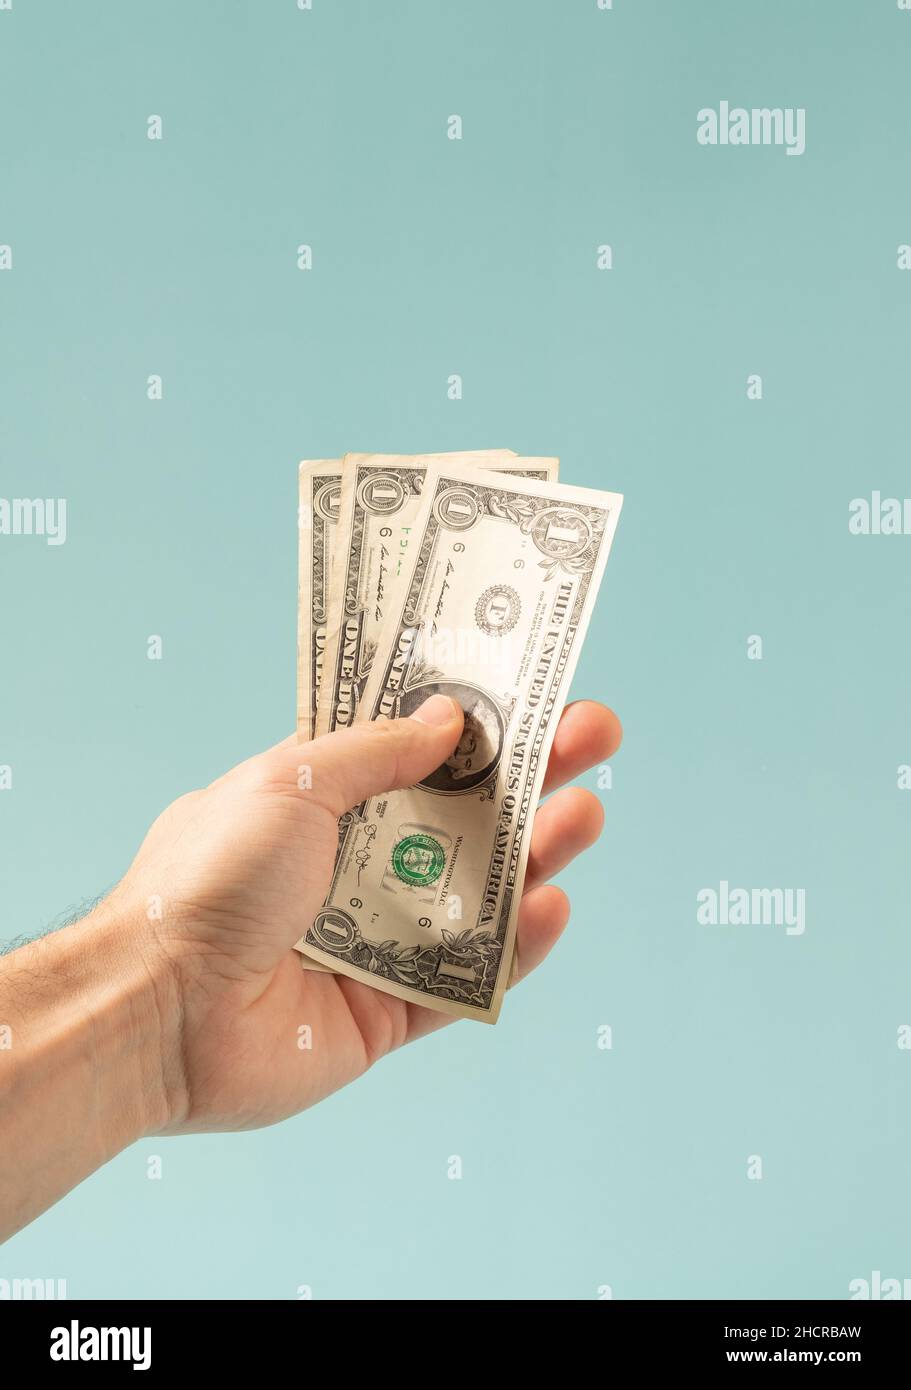 Hand holding one dollar bills on a pastel blue background. US economy conceptual background. Stock Photo